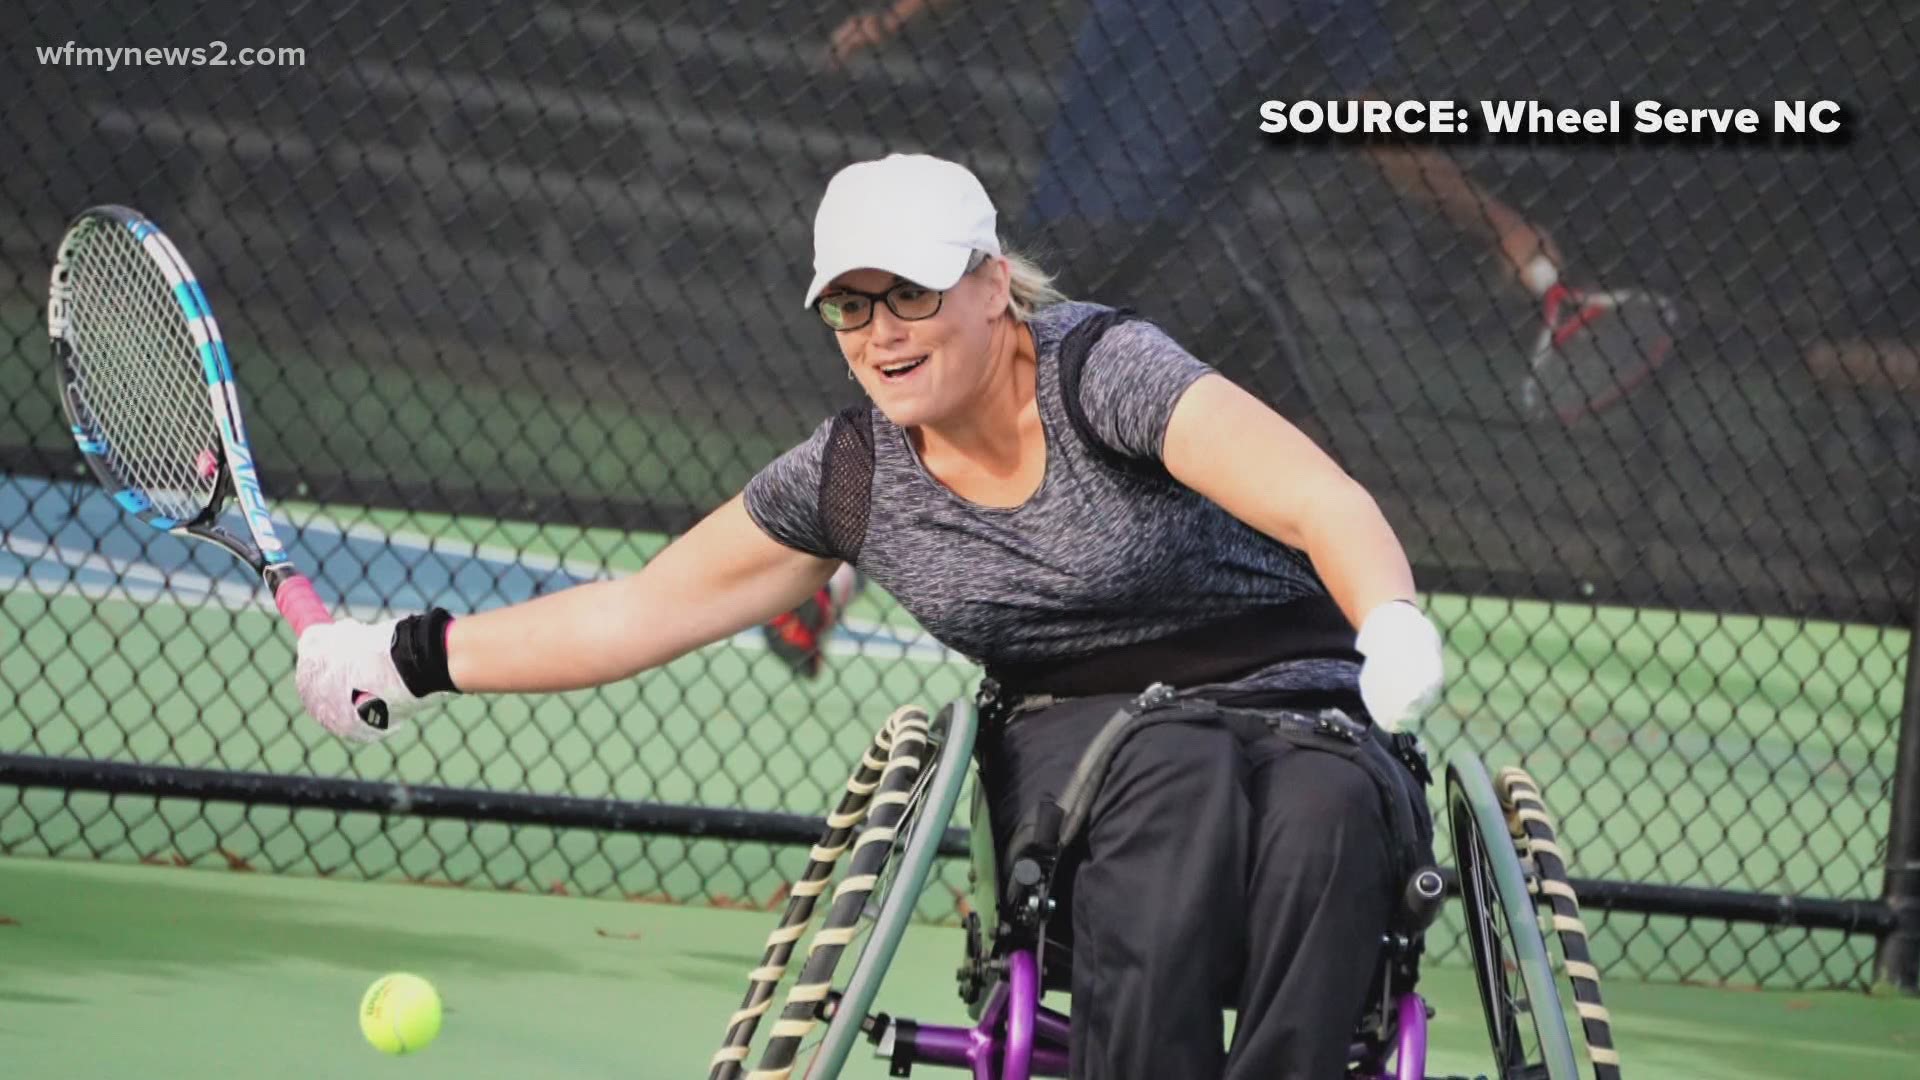 Wheel Serve NC is looking to expand its efforts statewide. The organization introduces disabled athletes to tennis.